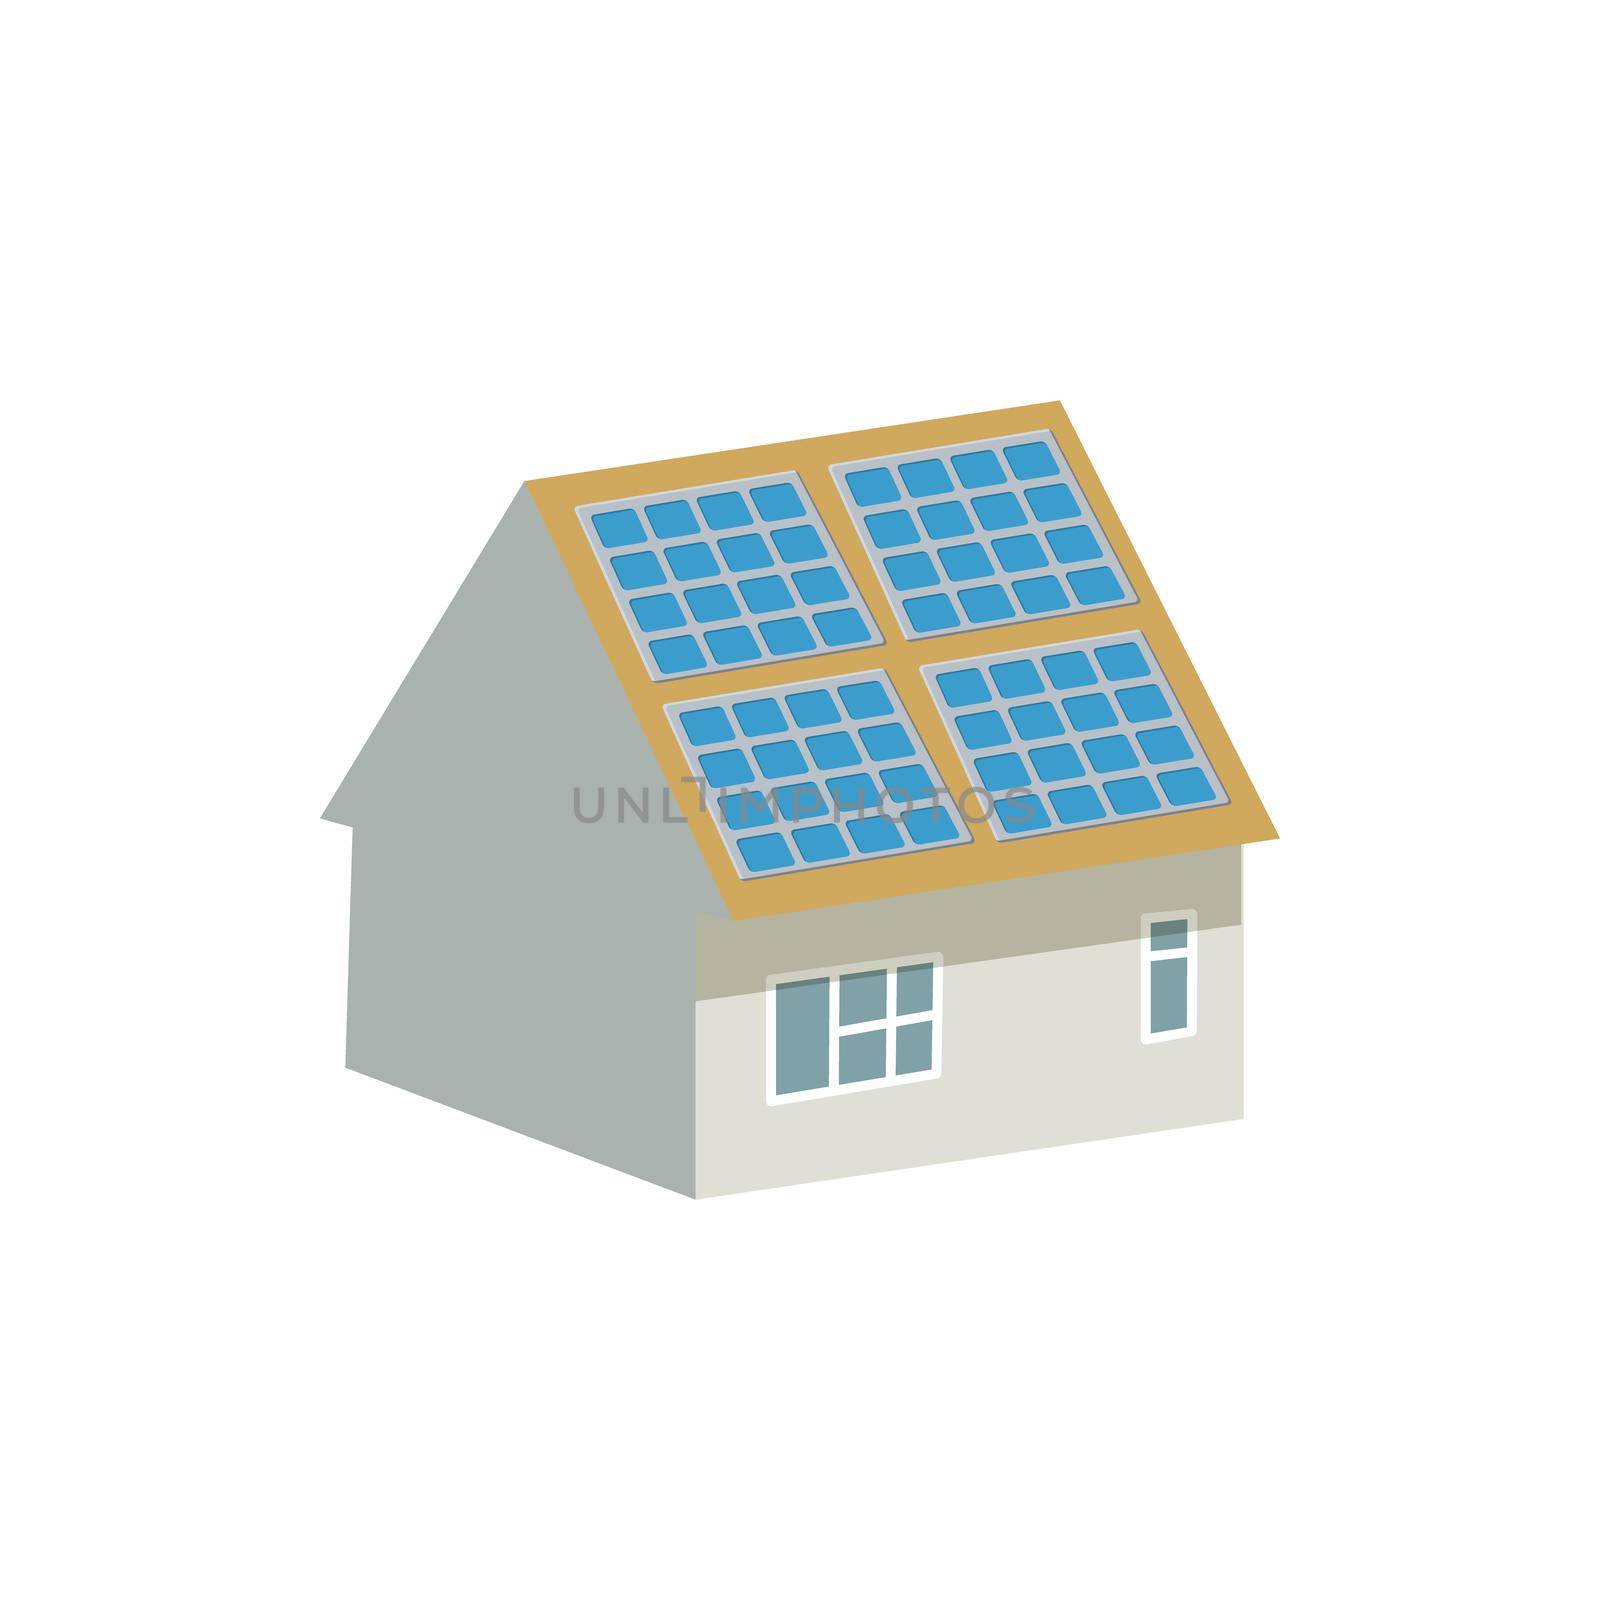 House with solar batteries on the roof icon in cartoon style on a white background